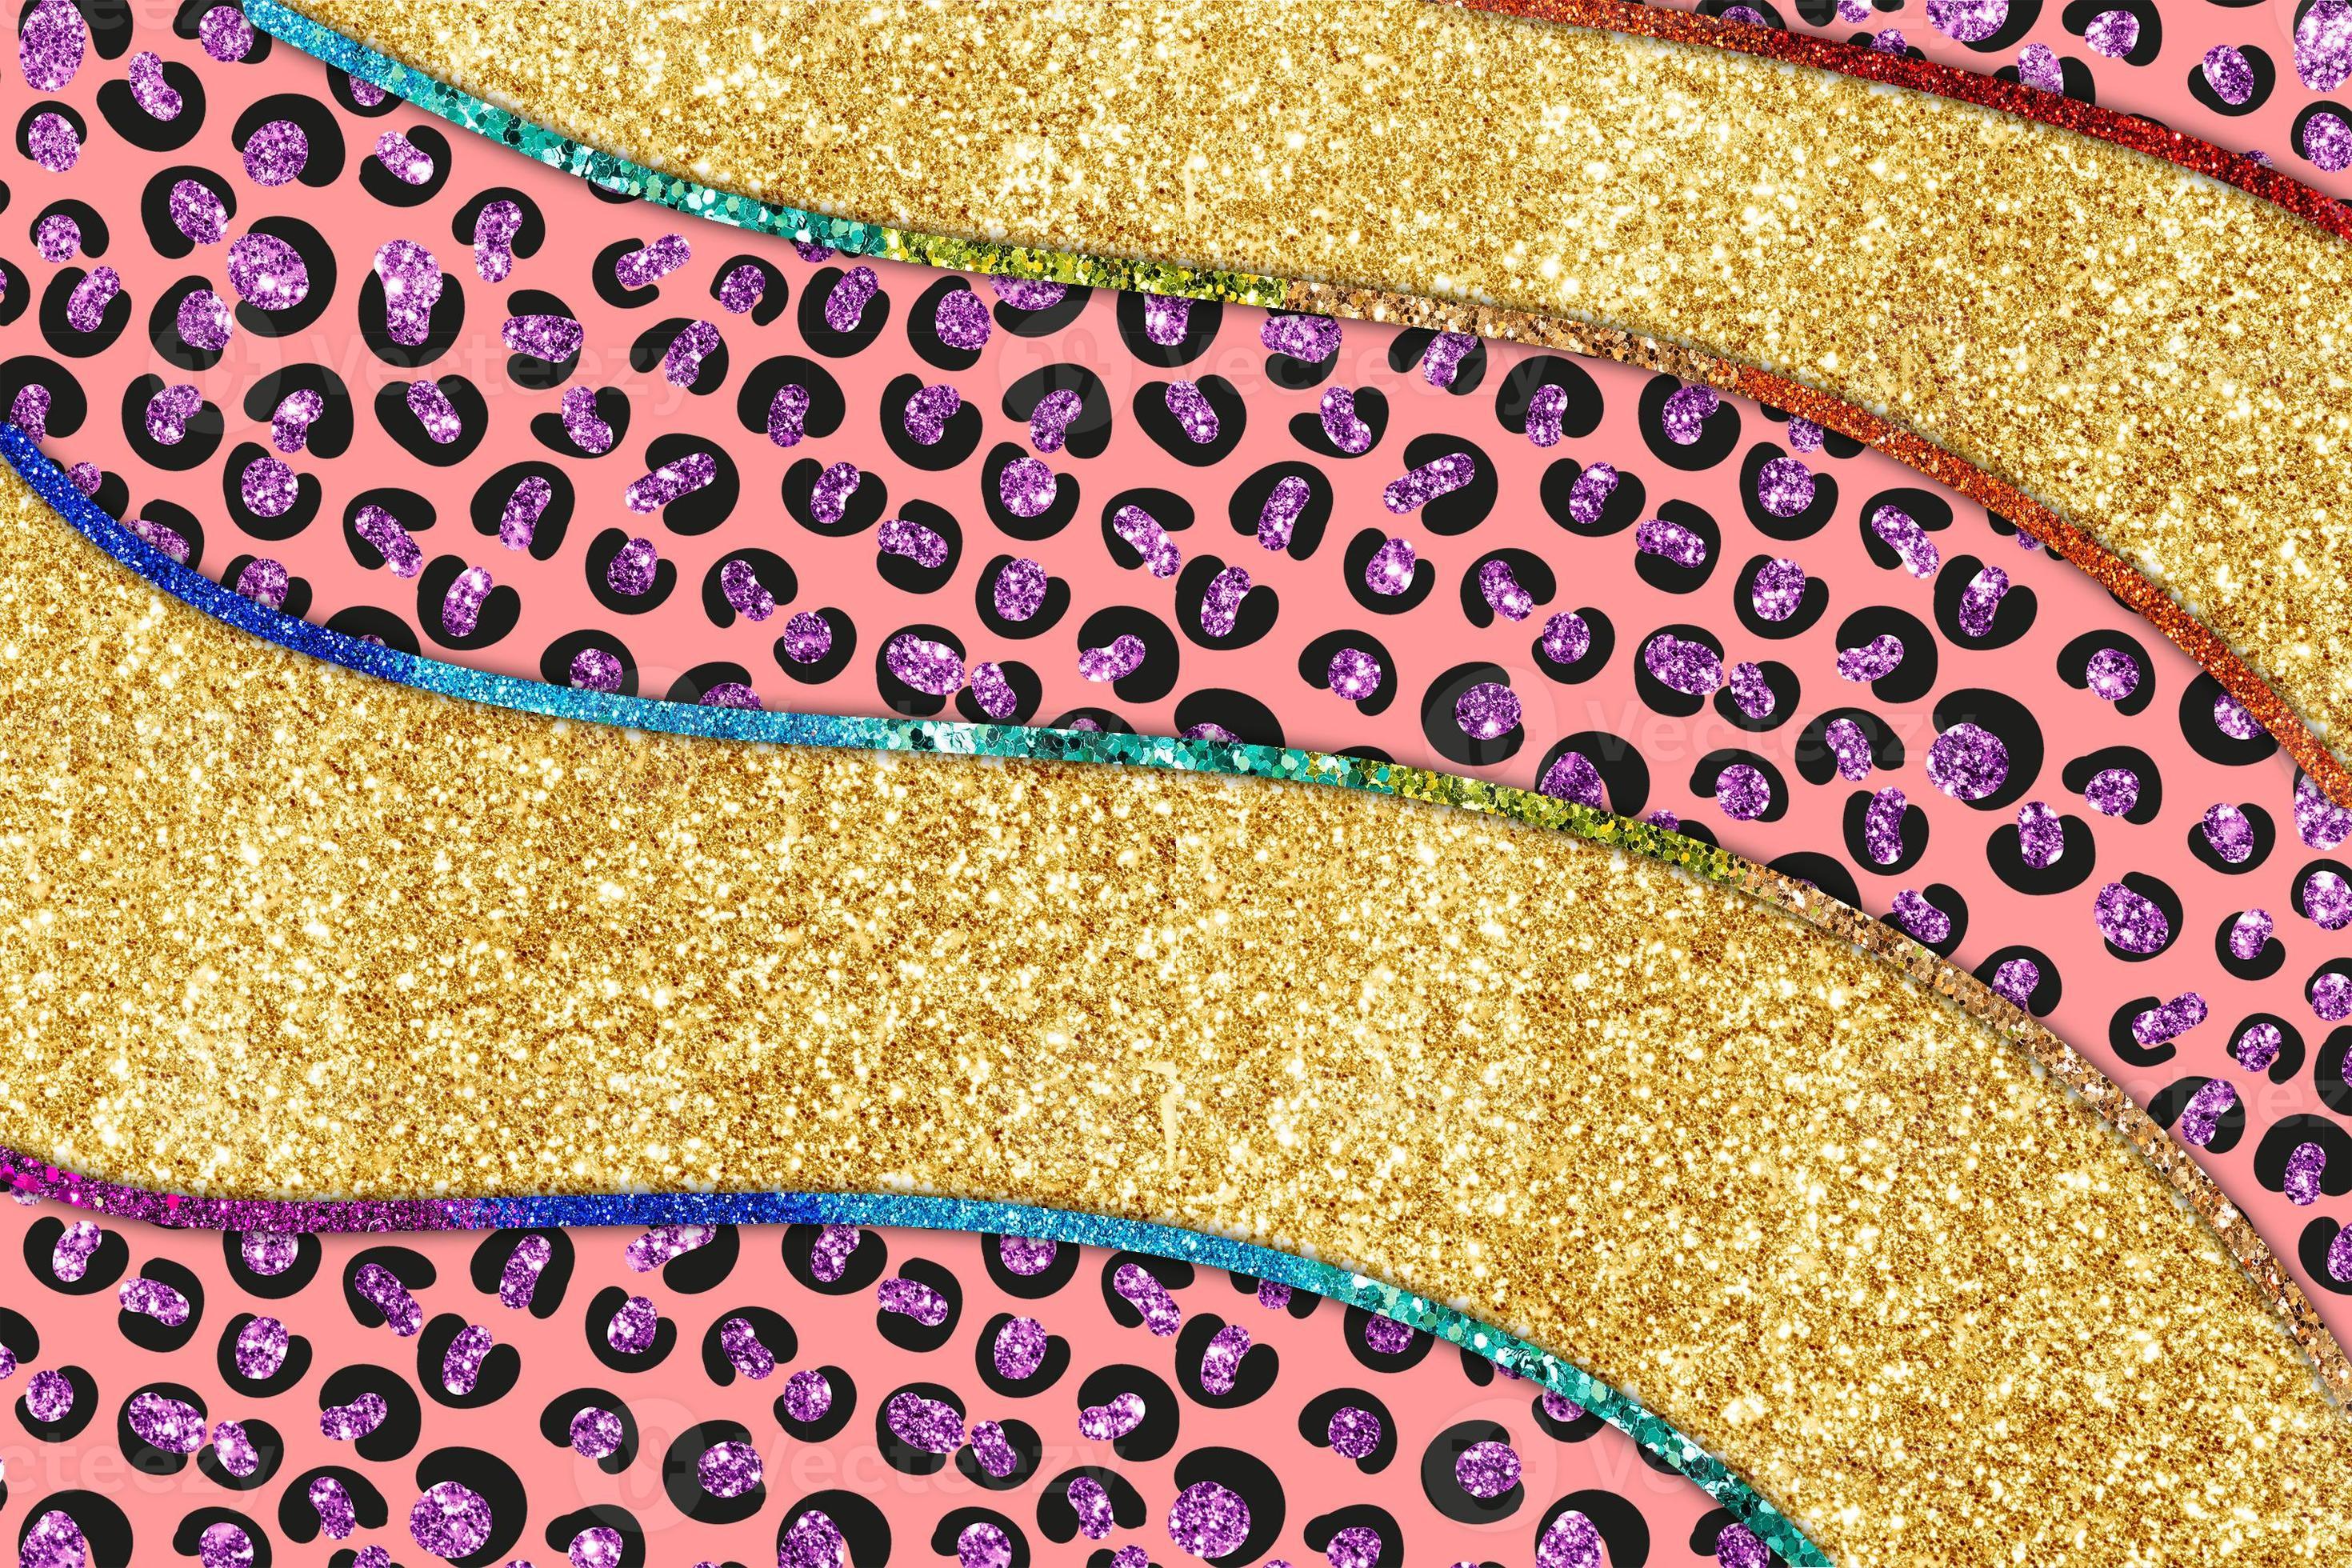 https://static.vecteezy.com/system/resources/previews/011/331/476/large_2x/glitter-strip-leopard-skin-texture-background-photo.jpg